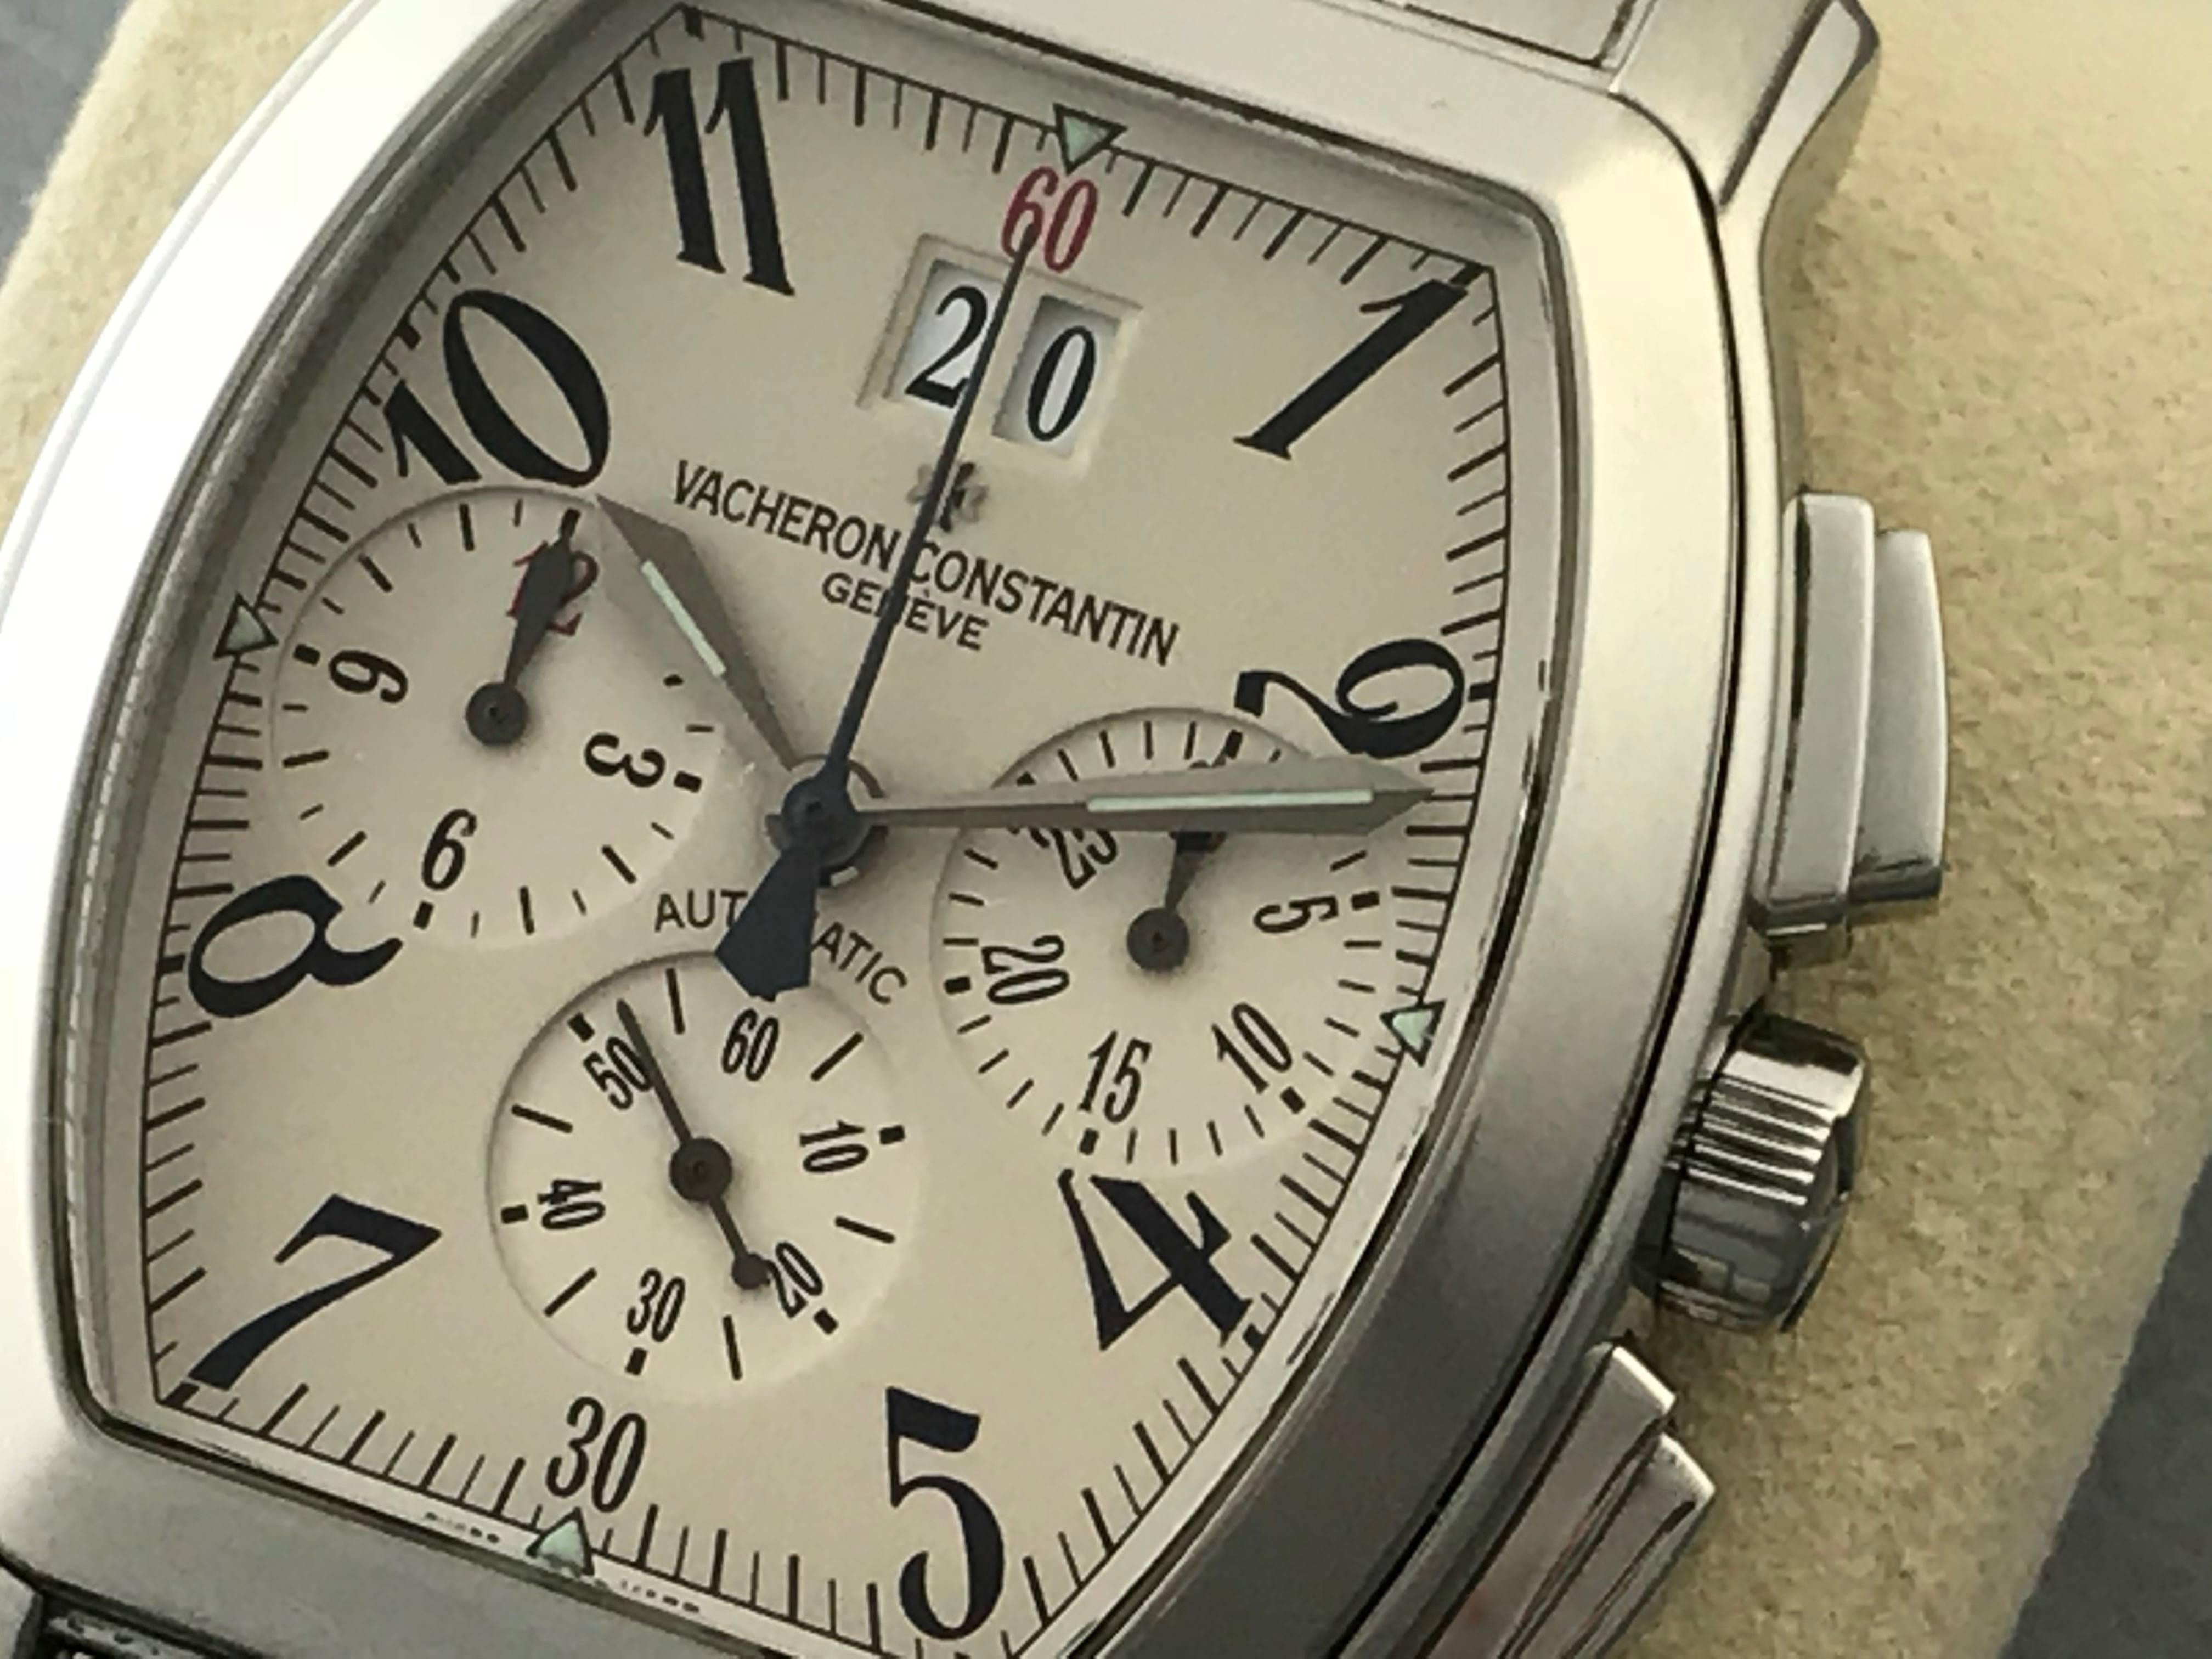 Vacheron Constantin Royal Eagle Chronograph, model 49145/339A-8970 certified pre-owned men's automatic wrist watch. Silvered Dial with Arabic numerals and Stainless Steel rectangular tonneau style case (35x50mm). Stainless Steel Vacheron Constantin